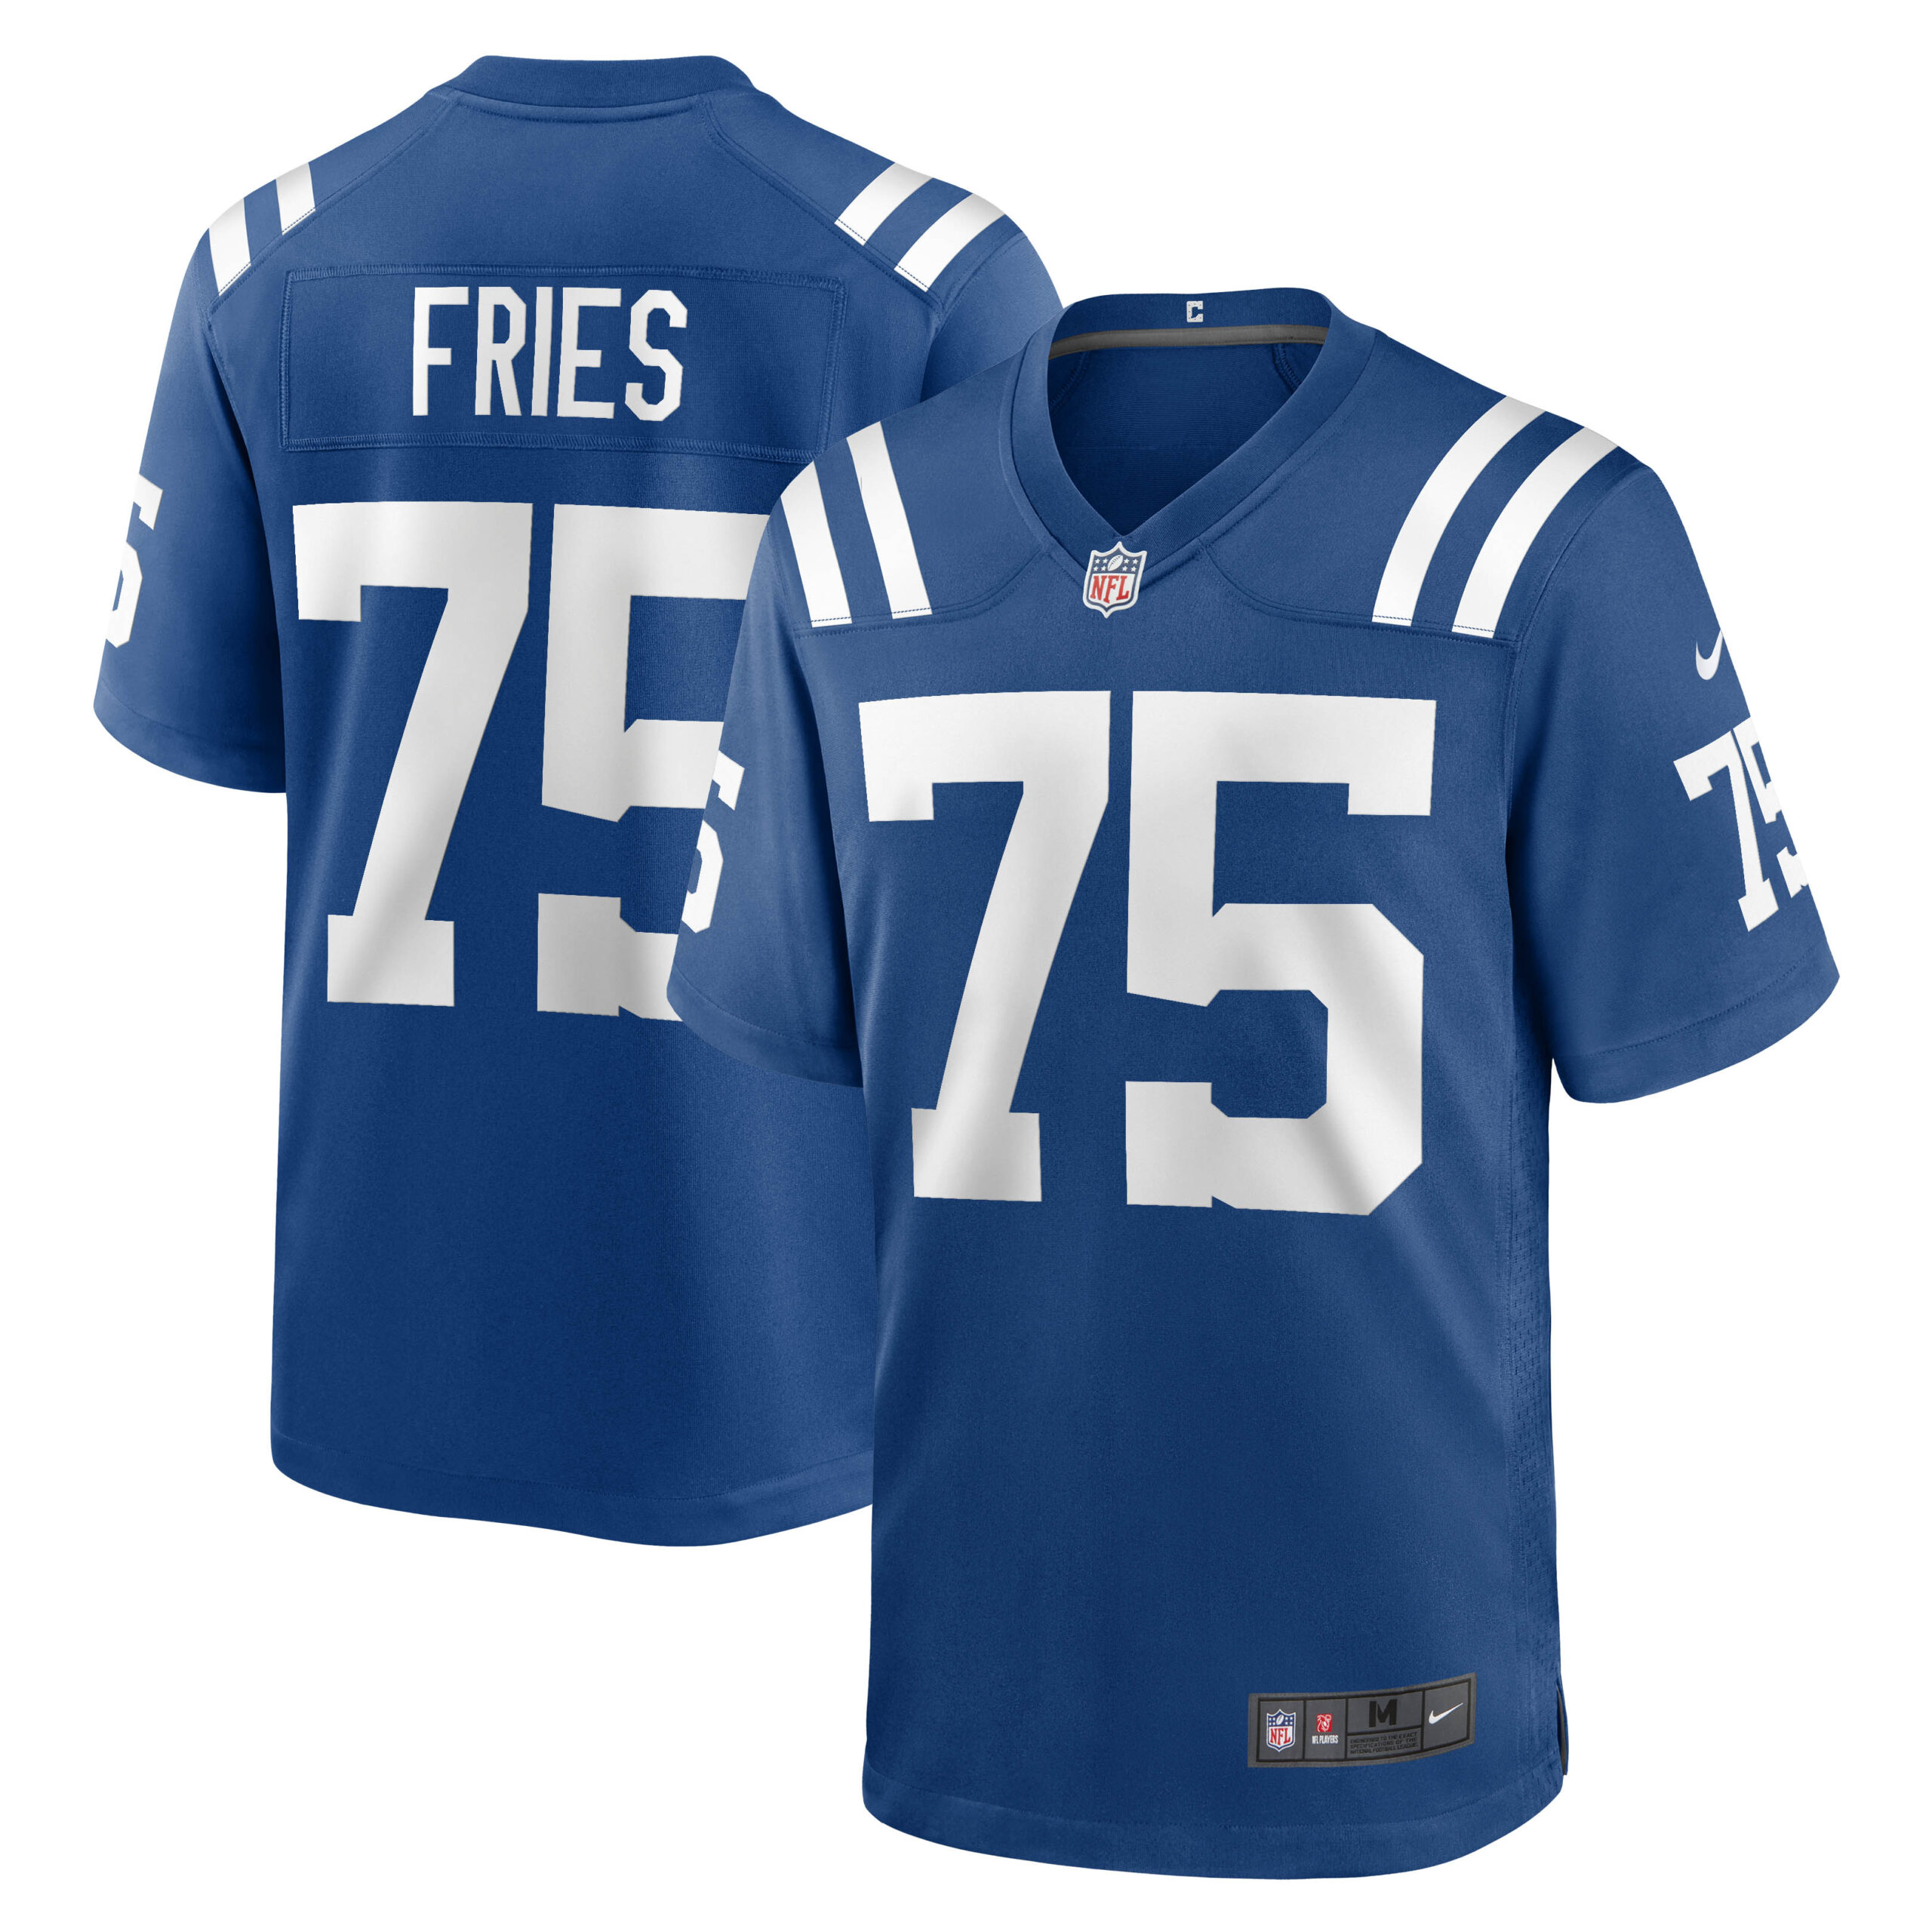 Men's Indianapolis Colts Jerseys Royal Will Fries Game Style